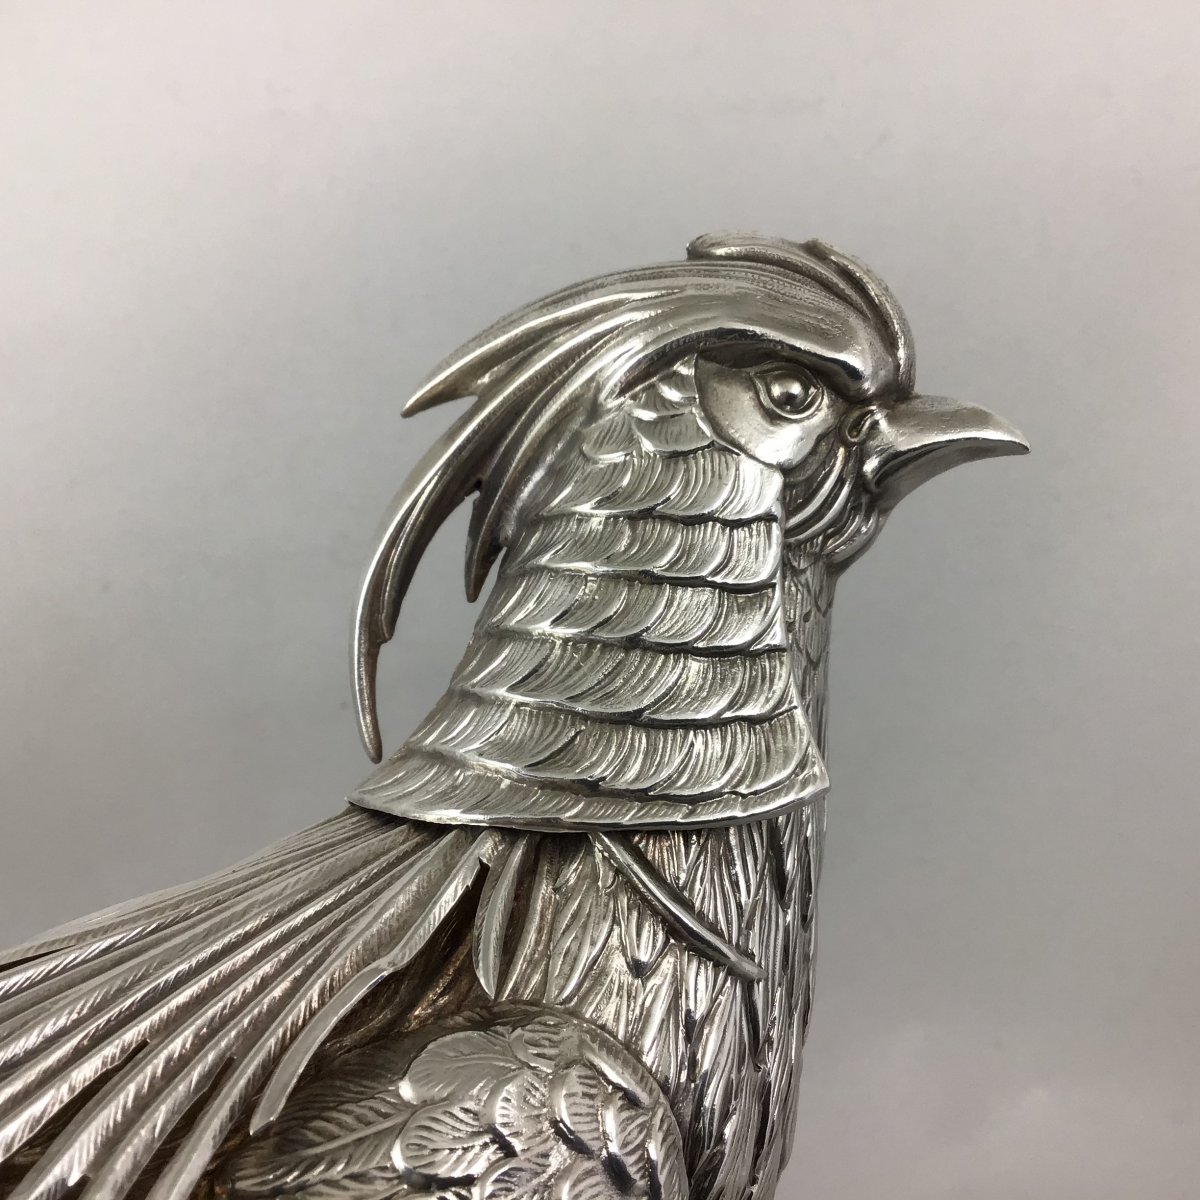 Pheasant In Sterling Silver, Spain Around 1960, Silver 916 \\%,